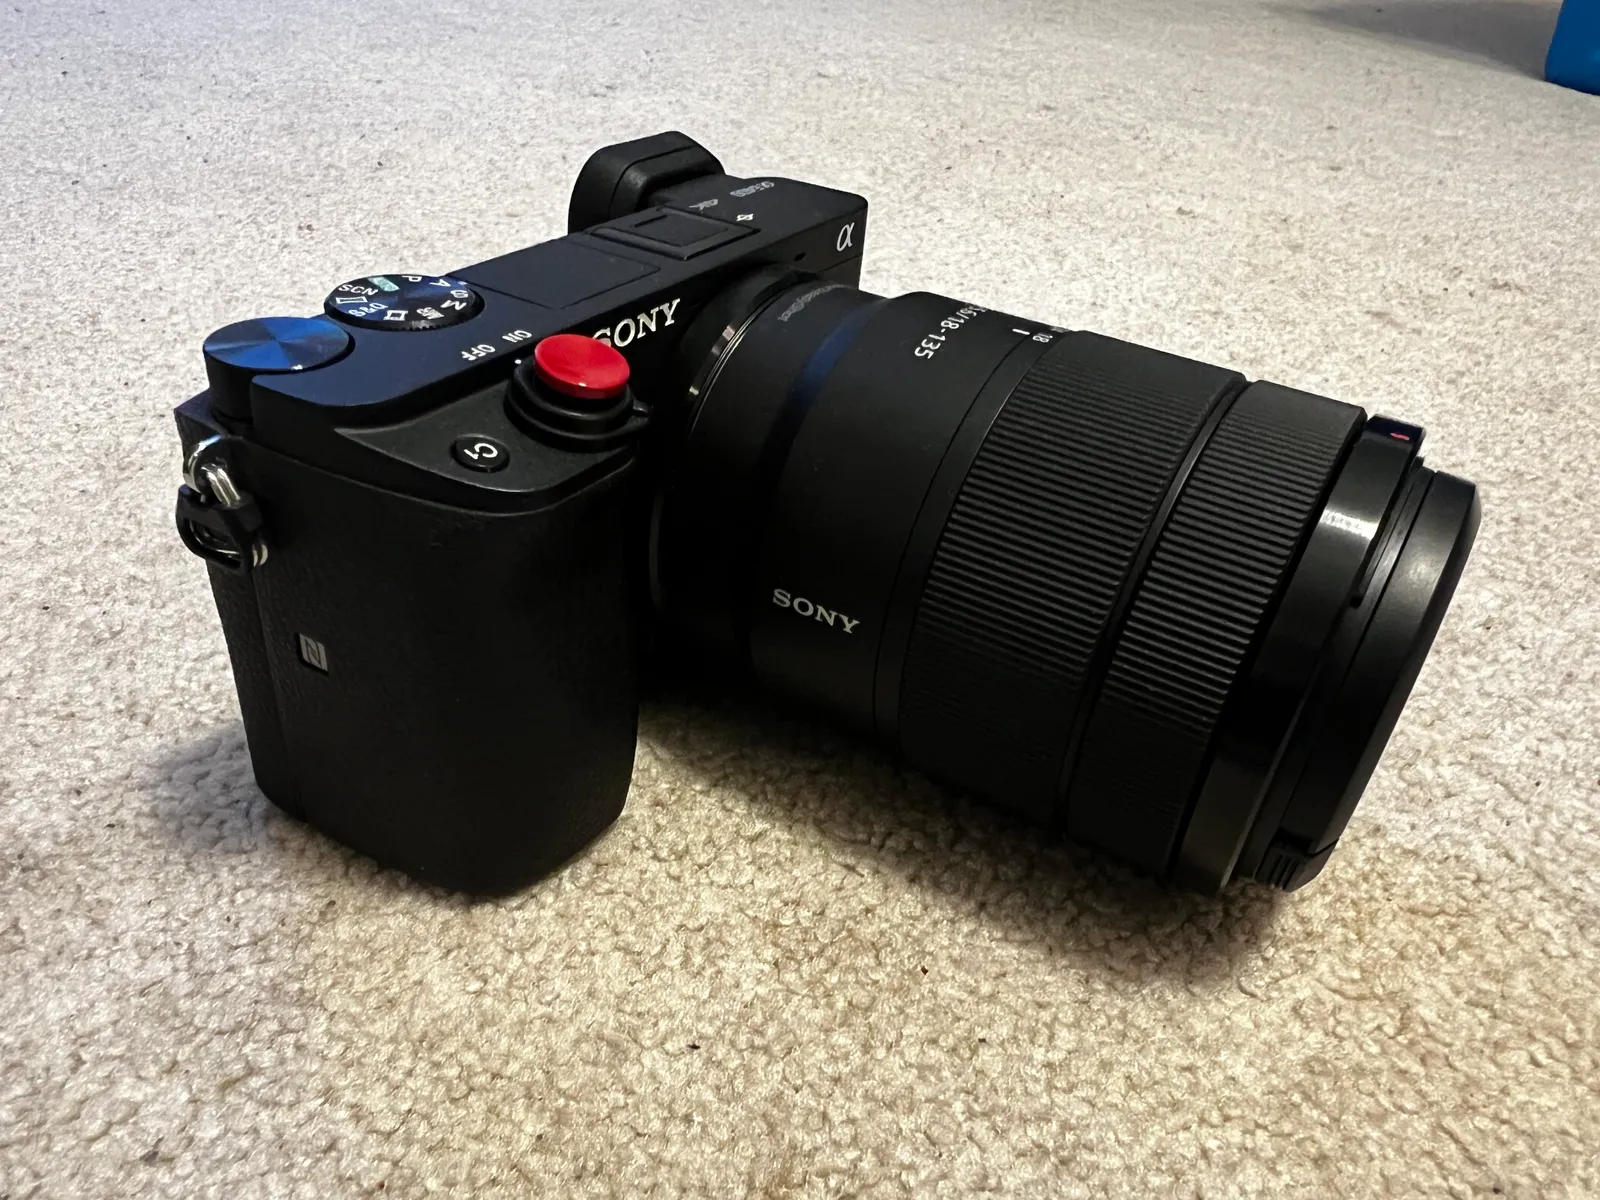 Sony A6400 with Sony 18-135mm and Sigma 30mm F1.4 Lens